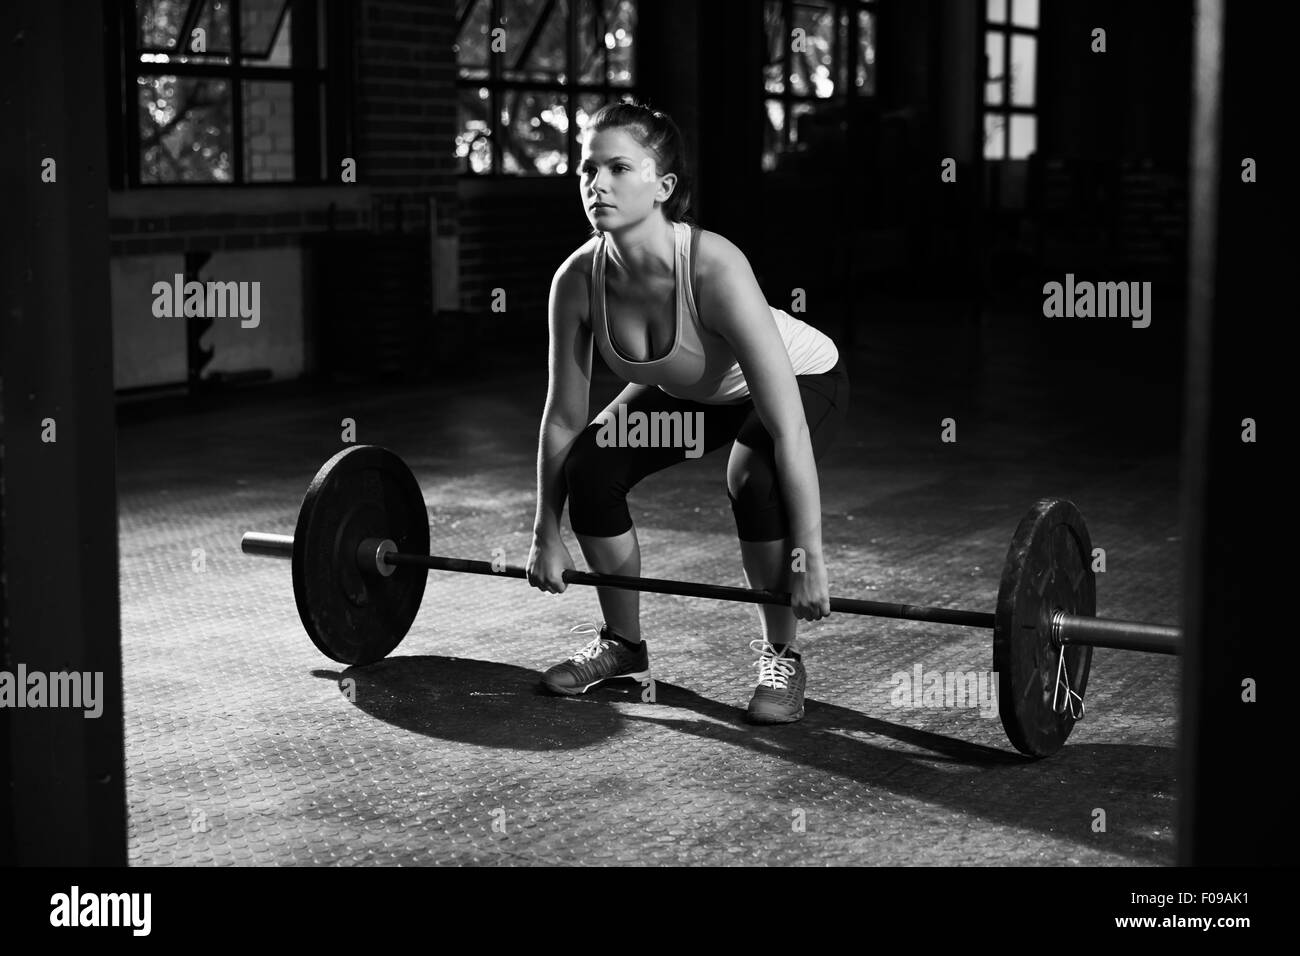 Black And White Shot Of Woman Preparing to Lift Weights Stock Photo